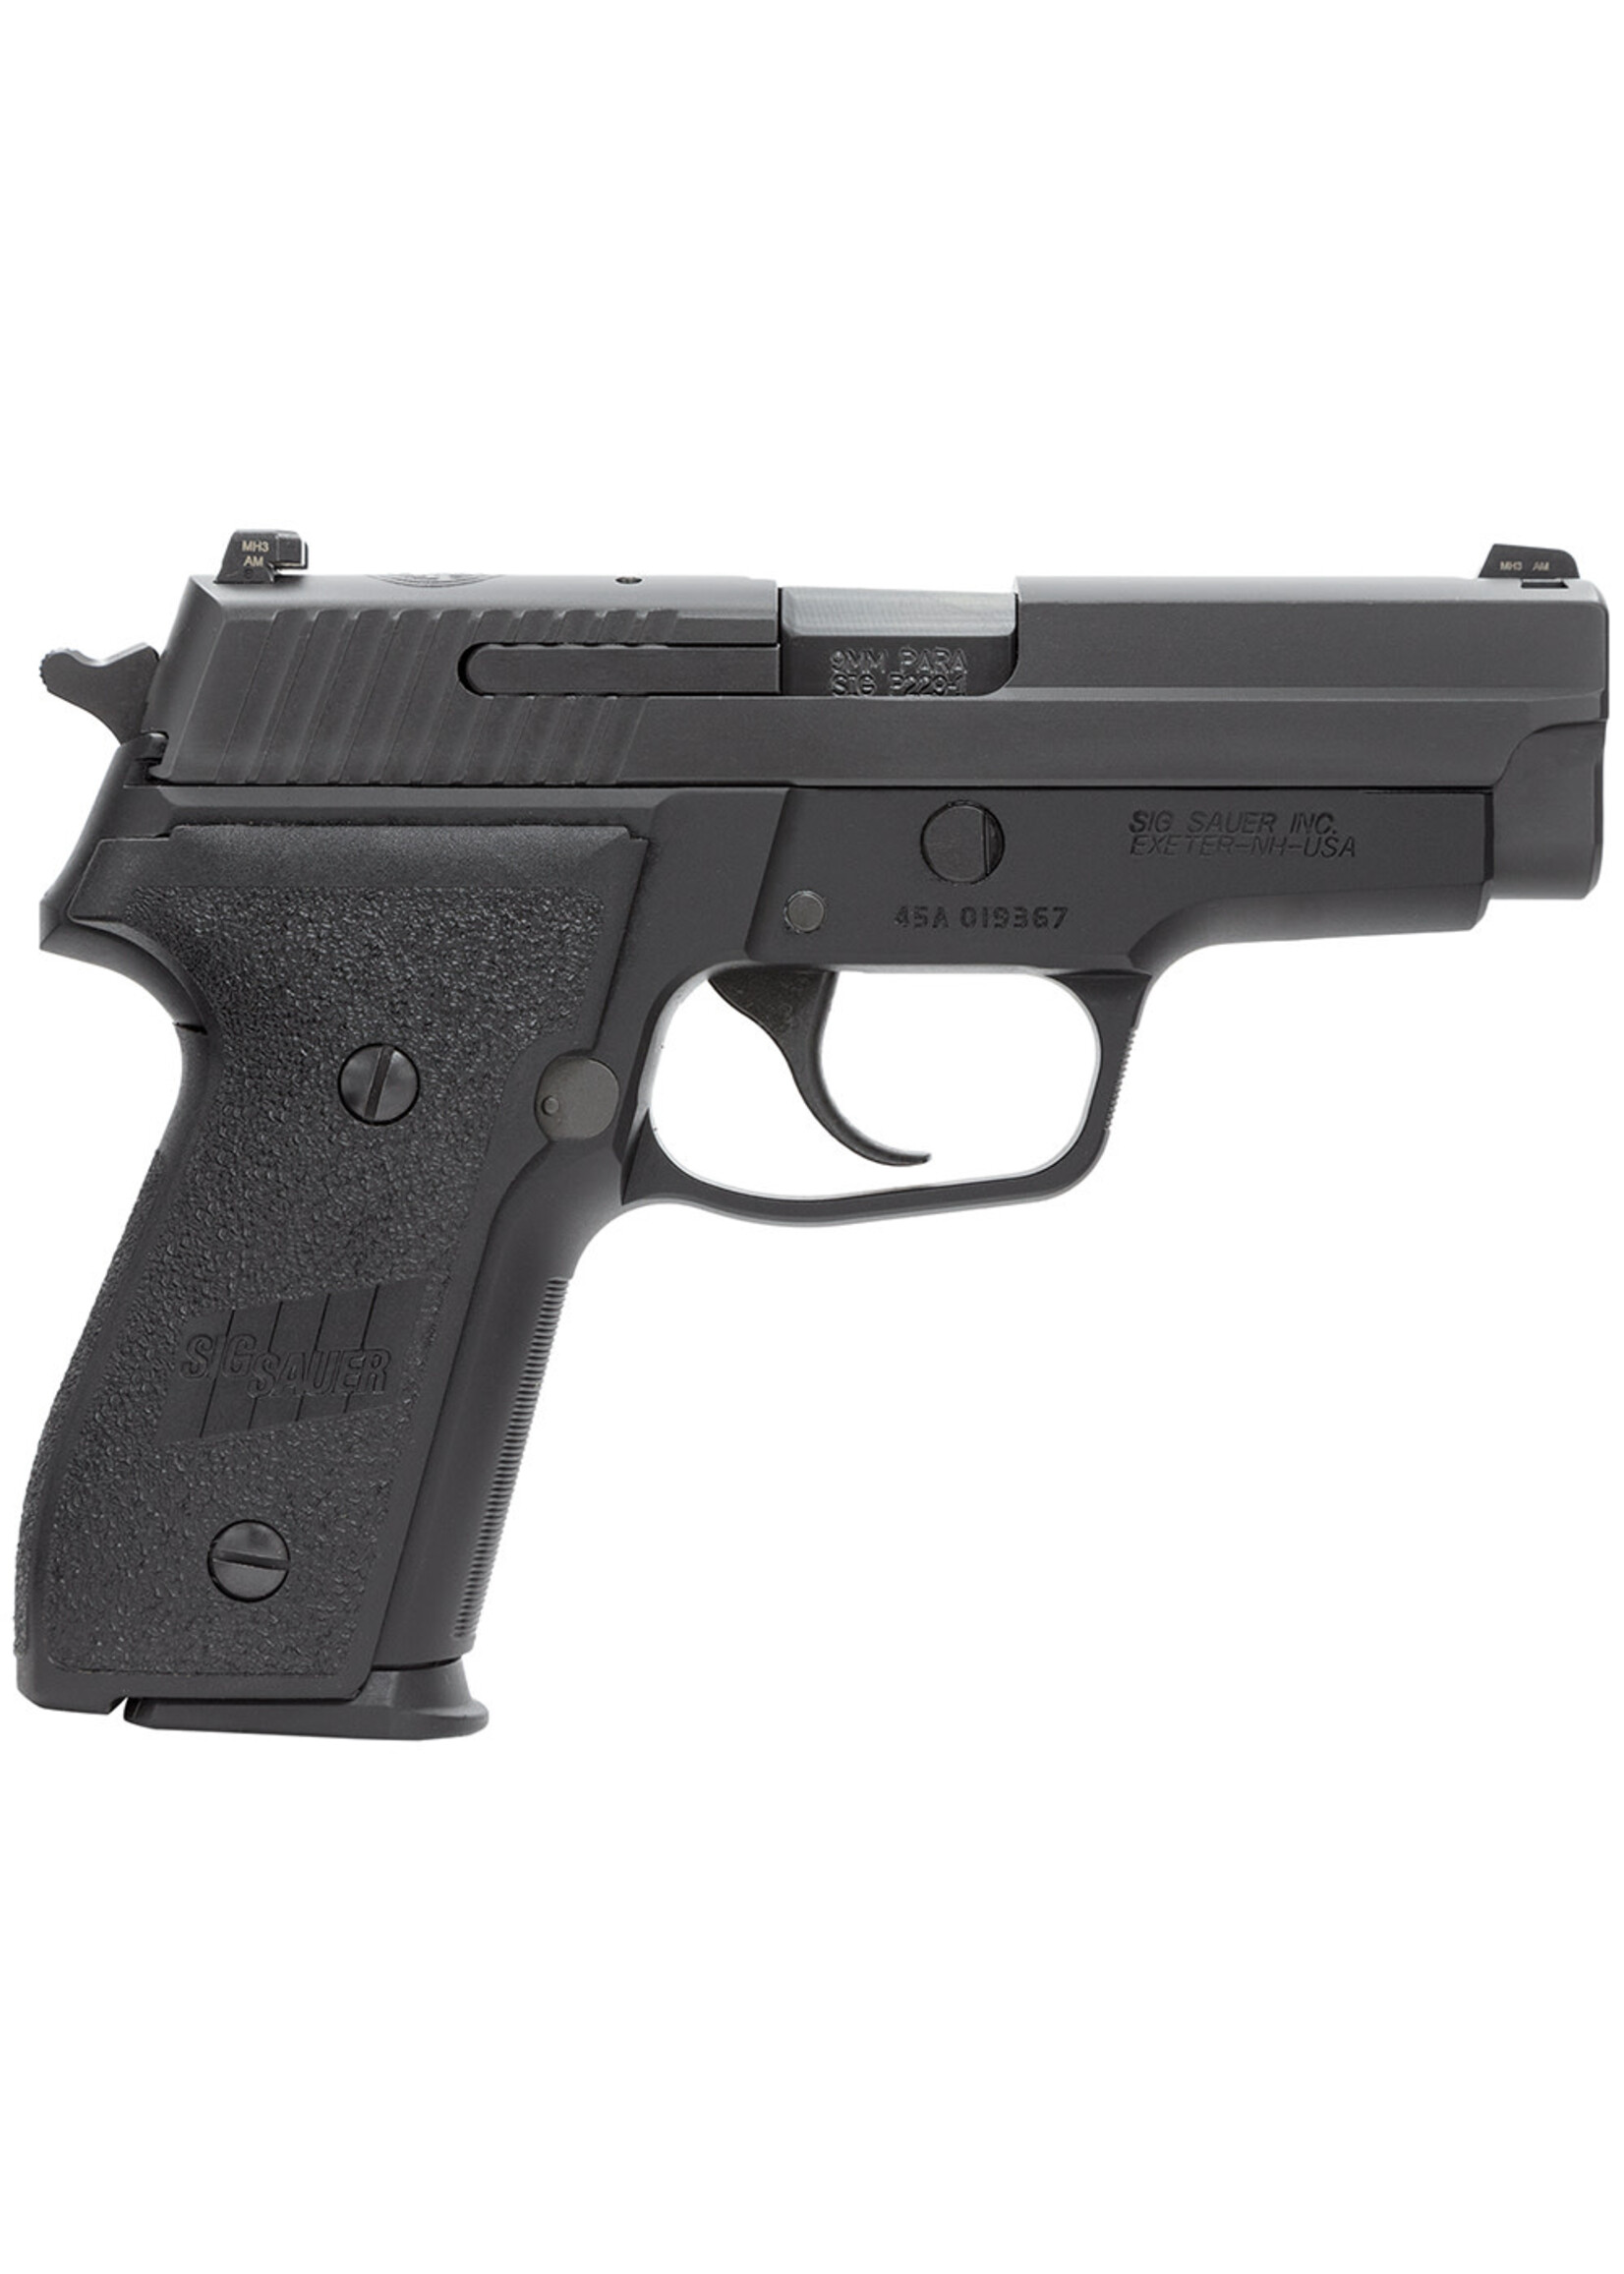 Sig Sauer Sig Sauer M11A1 P229 M11A1 9mm Luger Caliber with 3.90" Barrel, 15+1 Capacity, Black Hardcoat Anodized Finish Aluminum Frame, Serrated Black Nitron Stainless Steel Slide, Polymer Grip & Siglite Night Sights